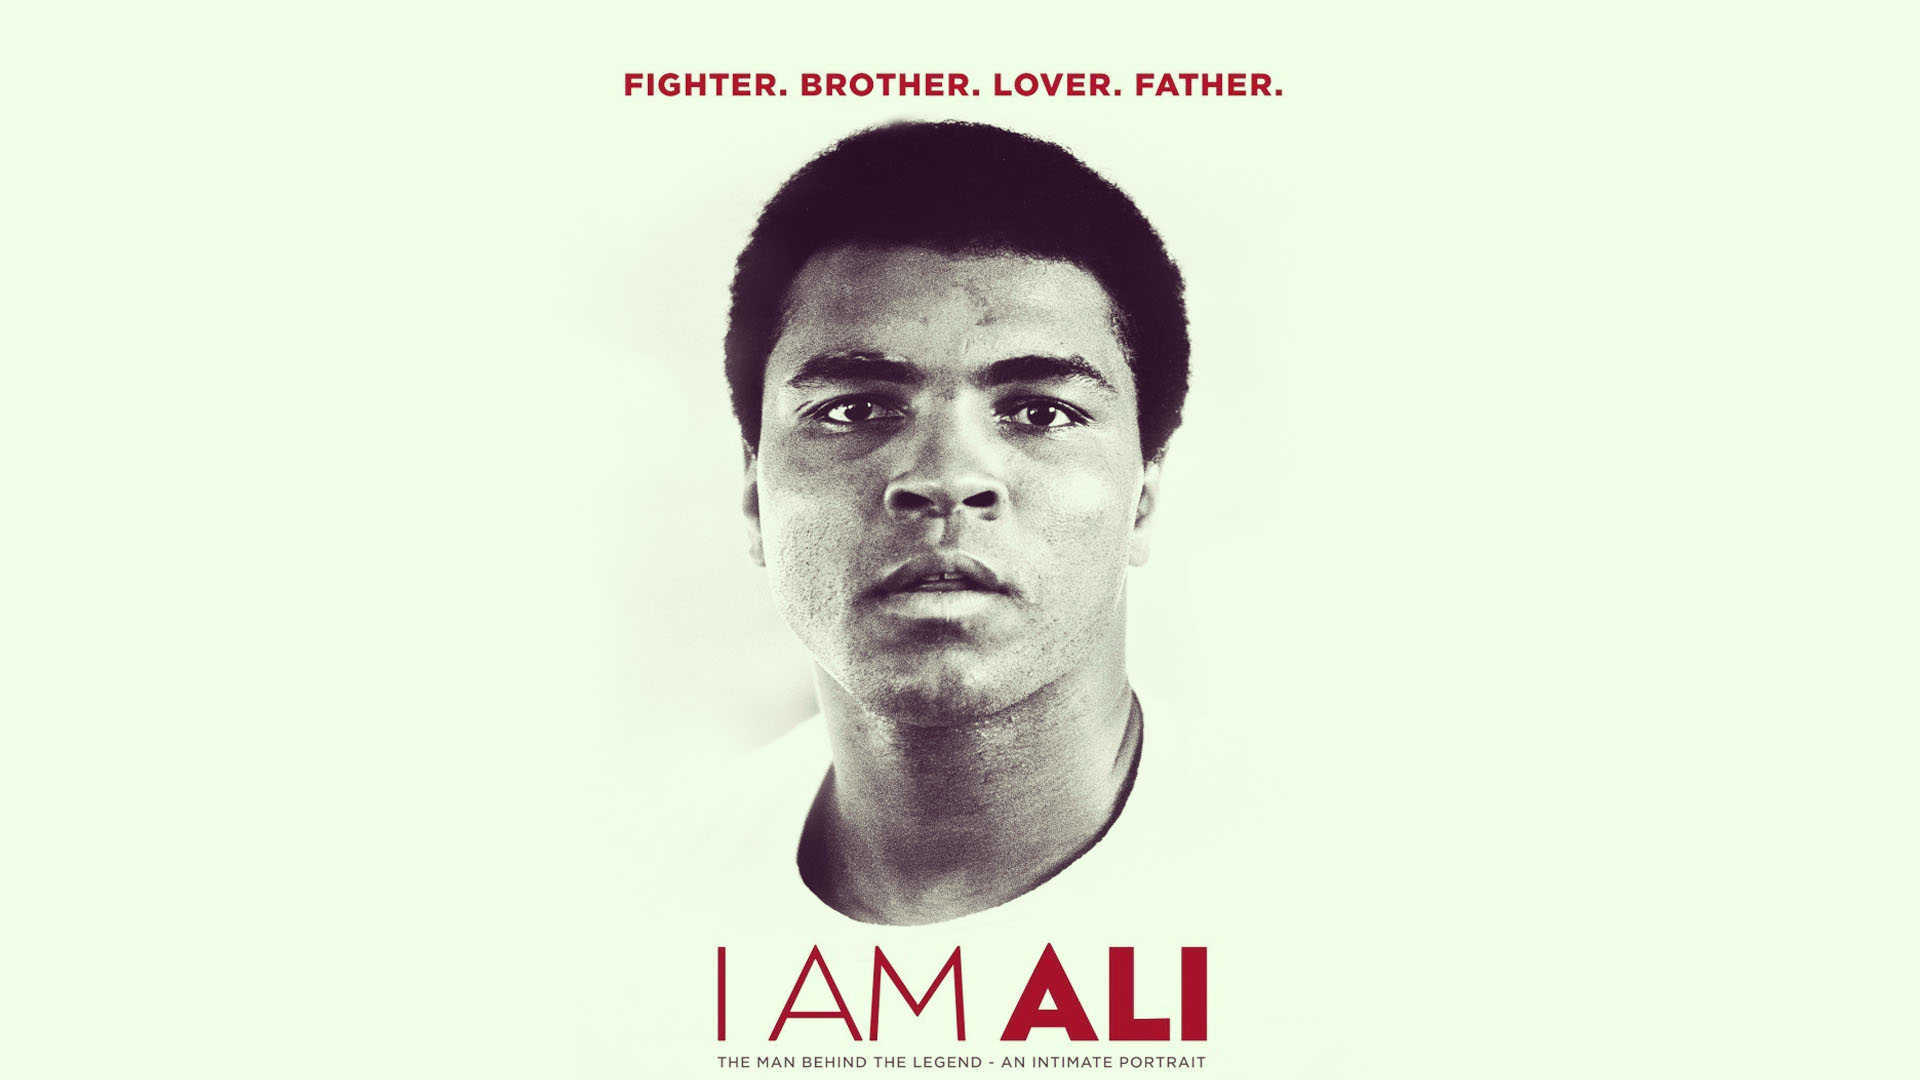 Muhammad Ali Is A Name Known And Revered The World Over For His Feats